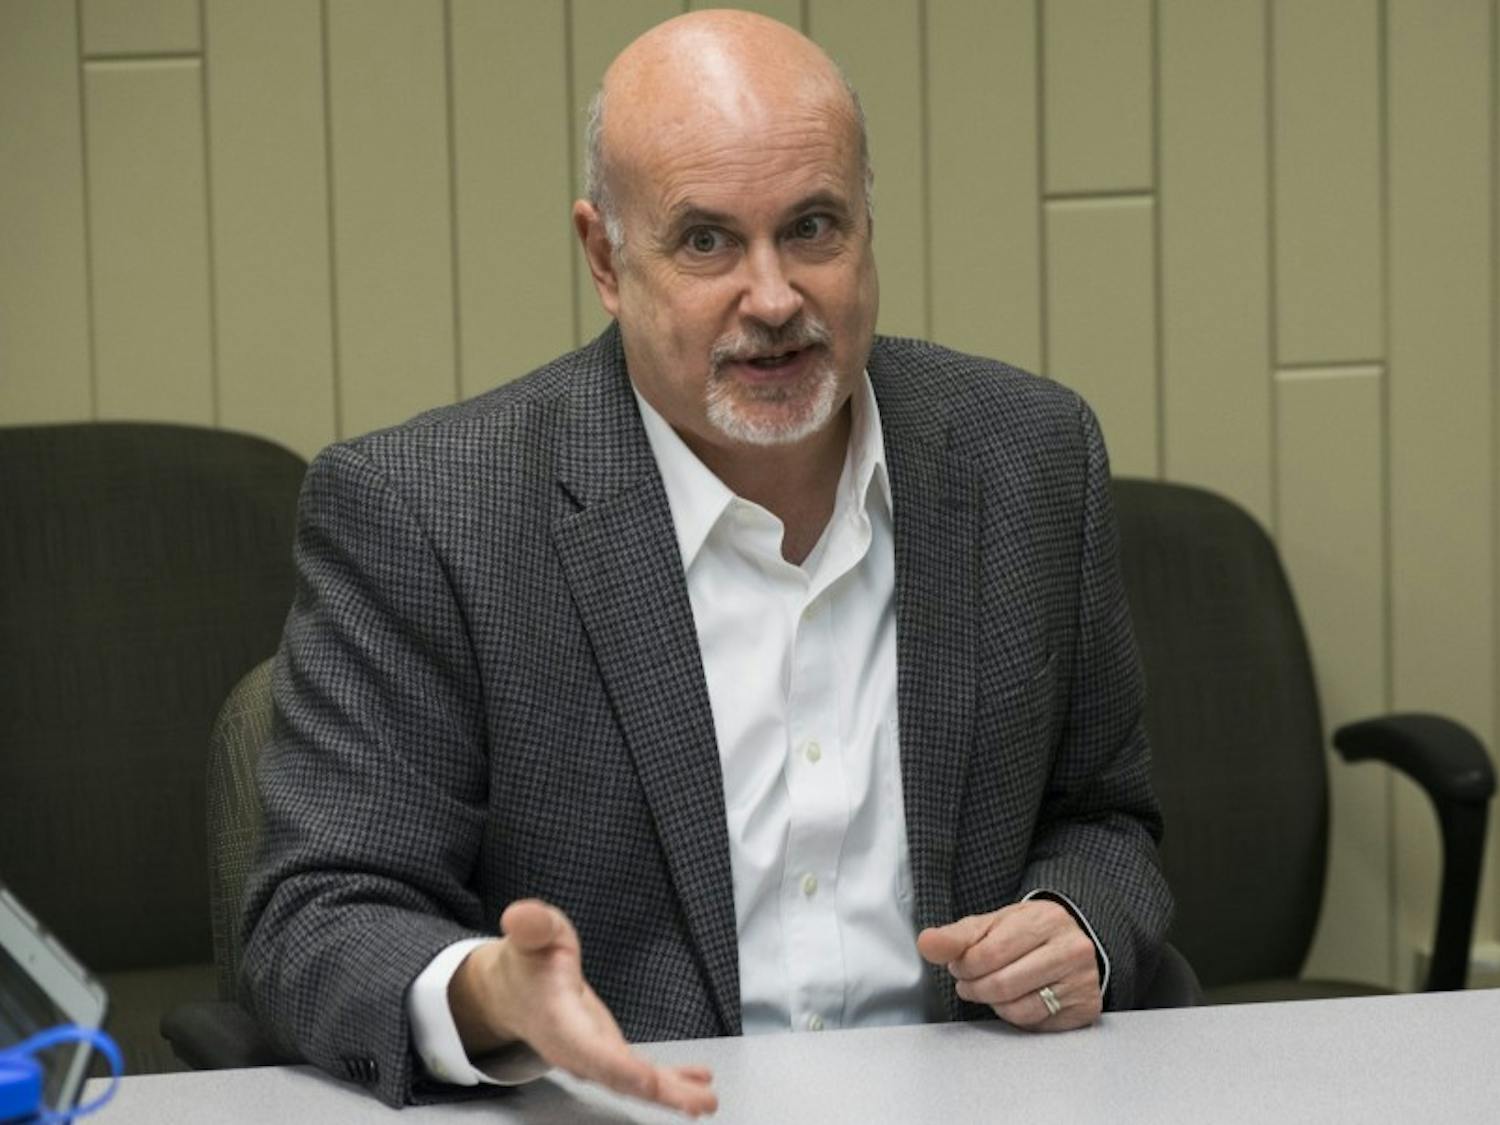 U.S. Rep. Mark Pocan, D-Wis., called for a ban on assault weapons in the wake of the deadliest mass shooting in U.S. history.&nbsp;&nbsp;&nbsp;